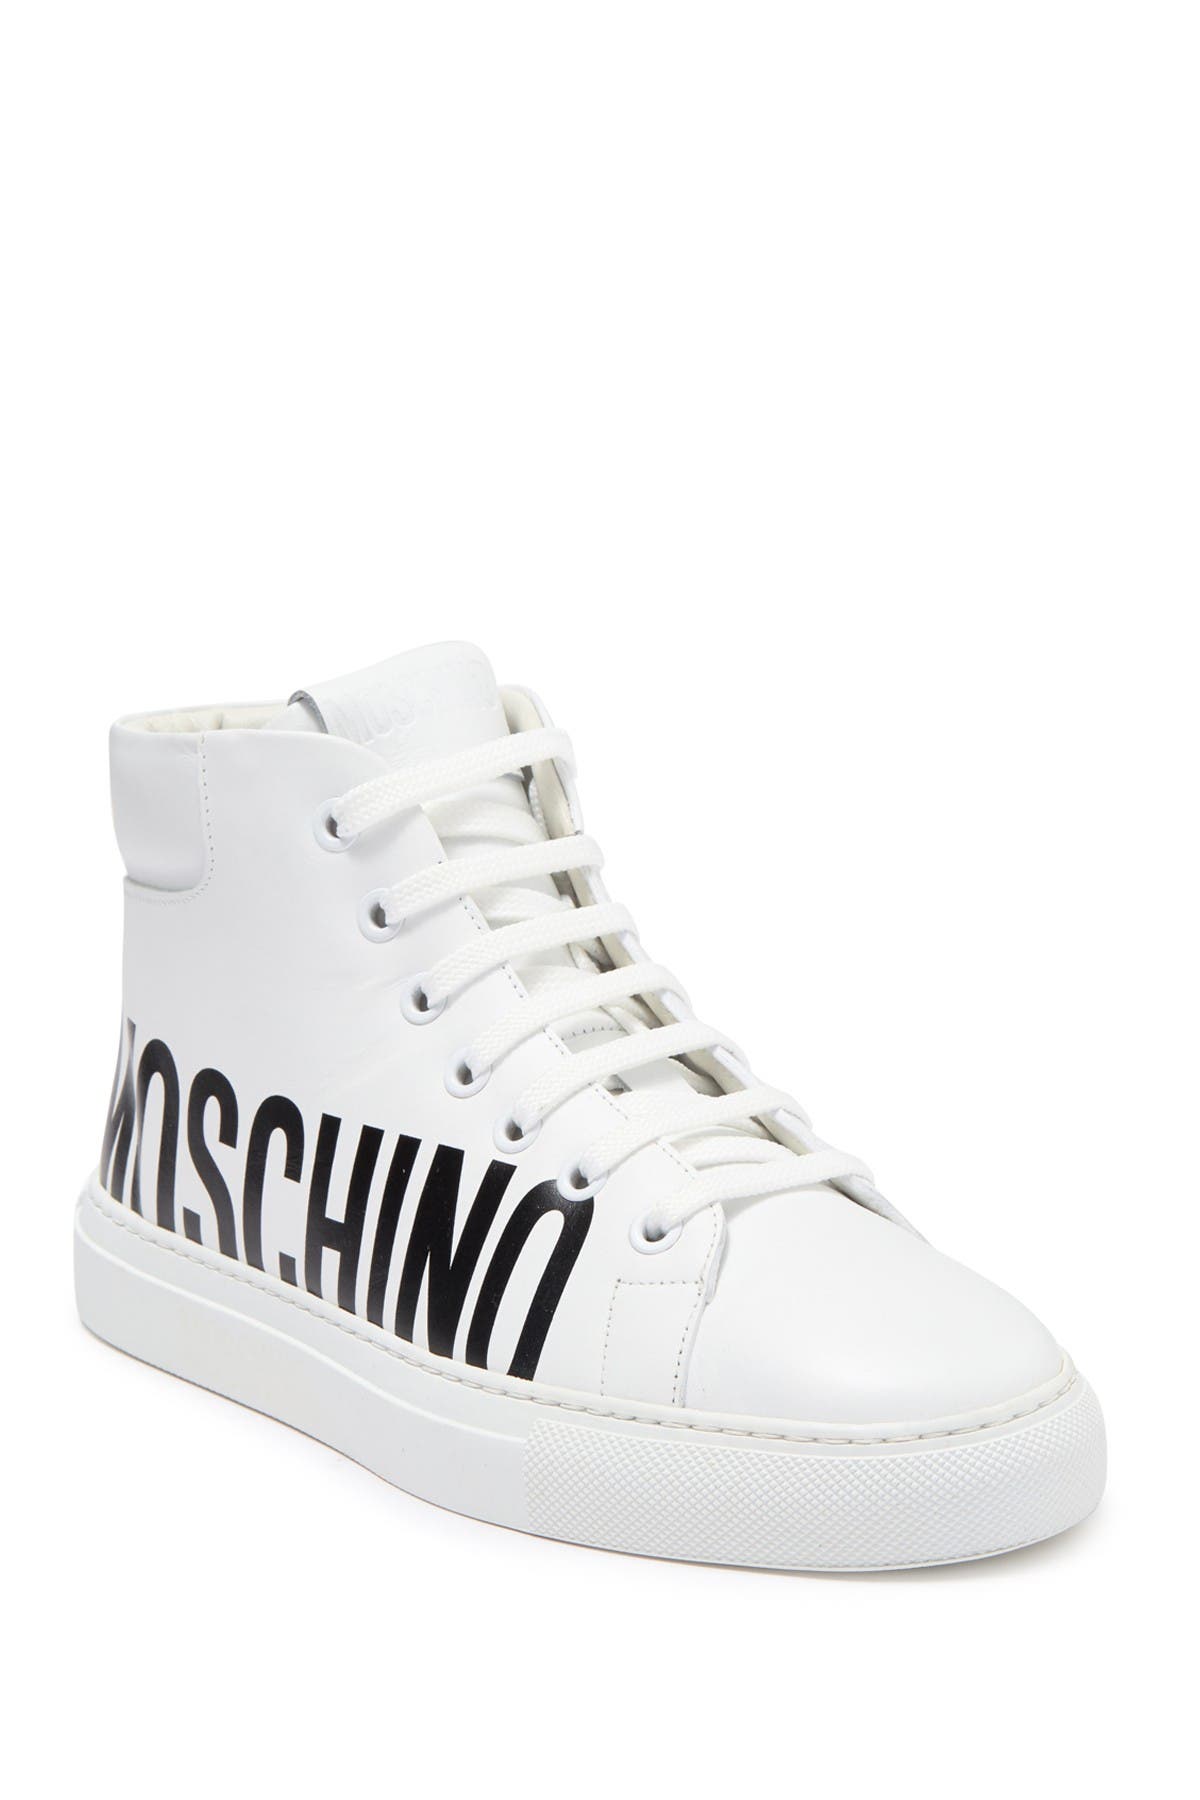 moschino high top sneakers womens